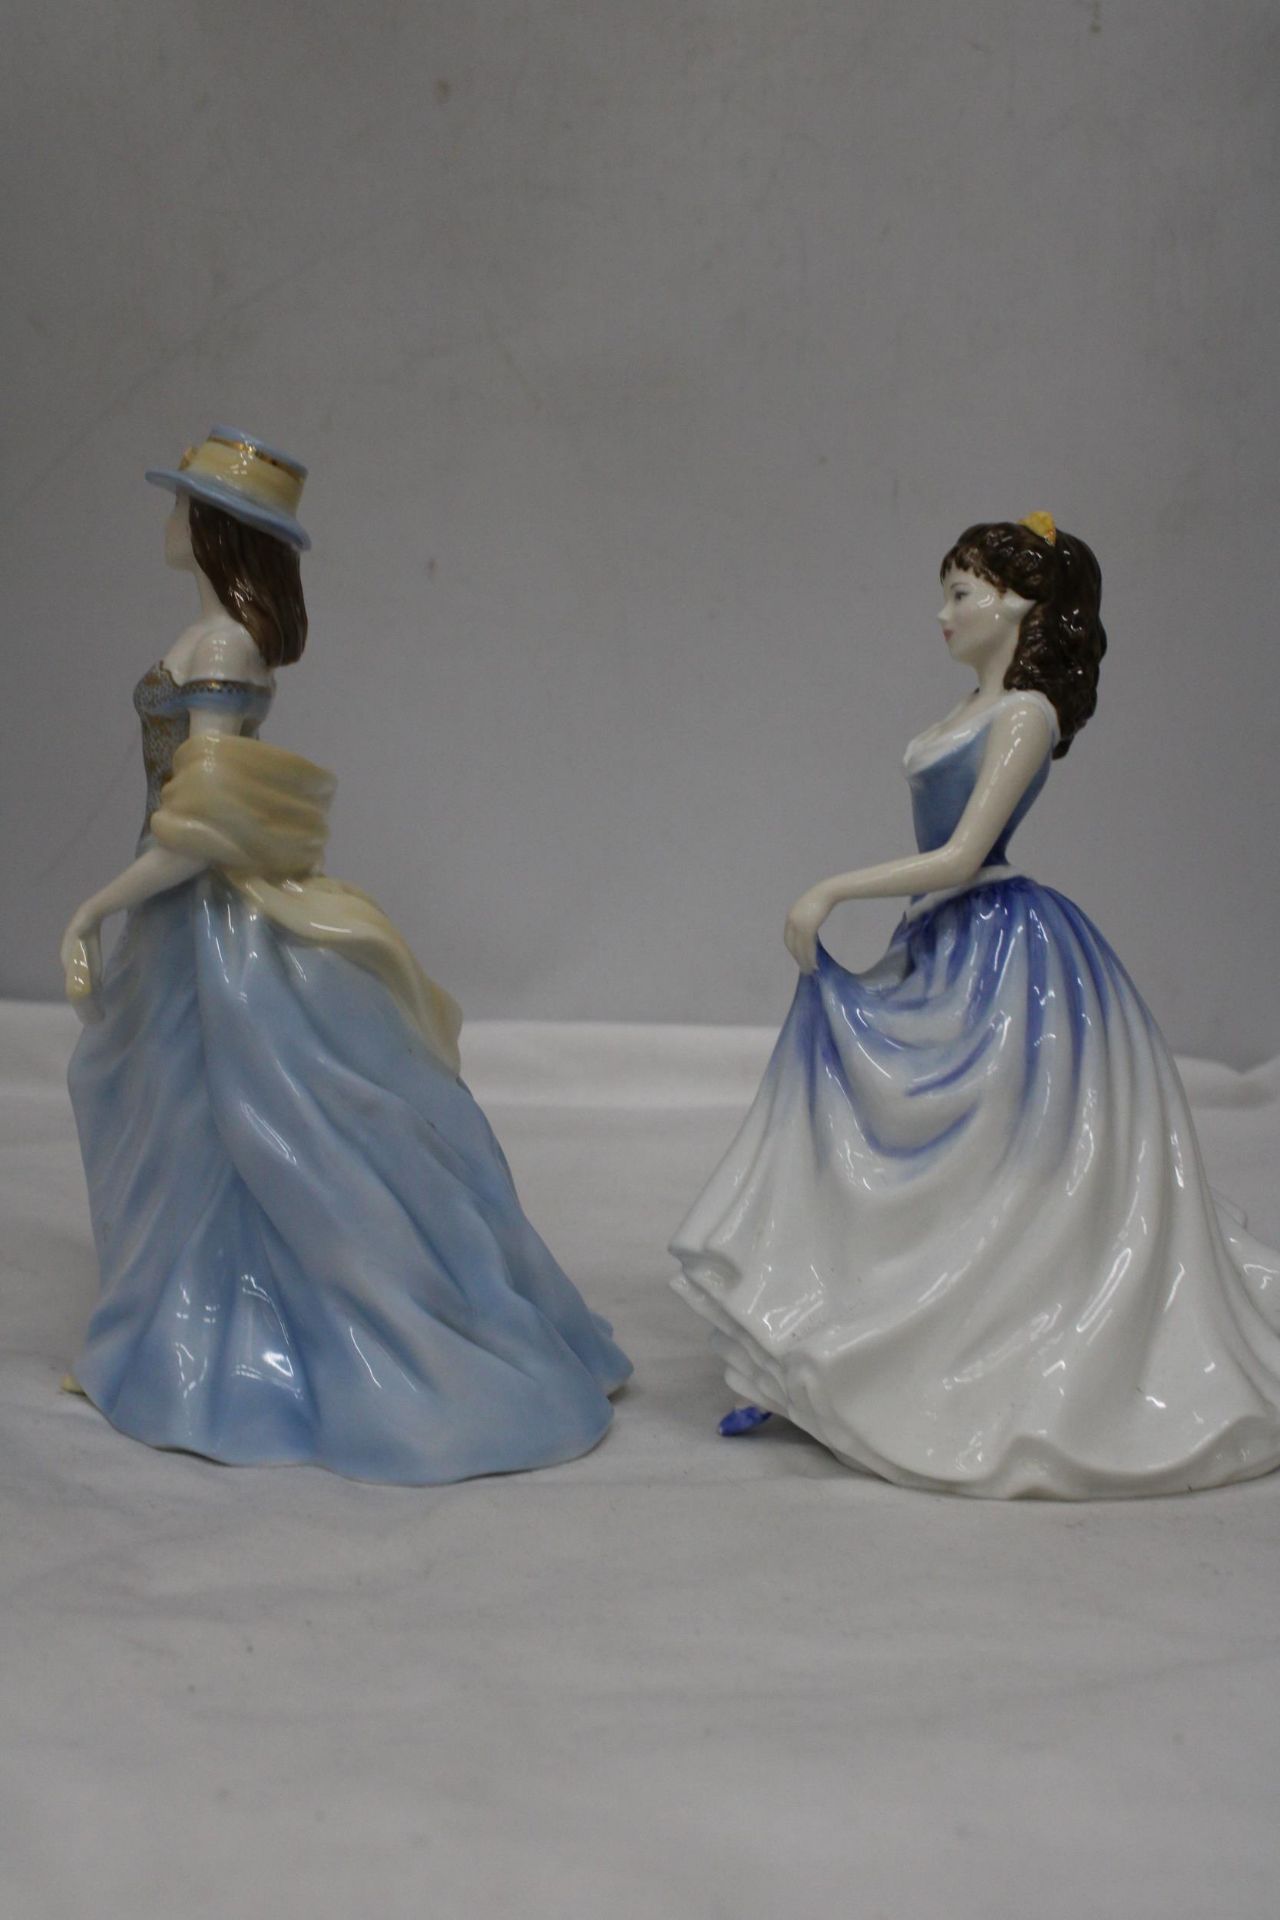 A ROYAL DOULTON FIGURE "MICHELLE" HN 4158 AND A ROYAL WOICESTER FIGURE "LOUISE" - Image 3 of 7